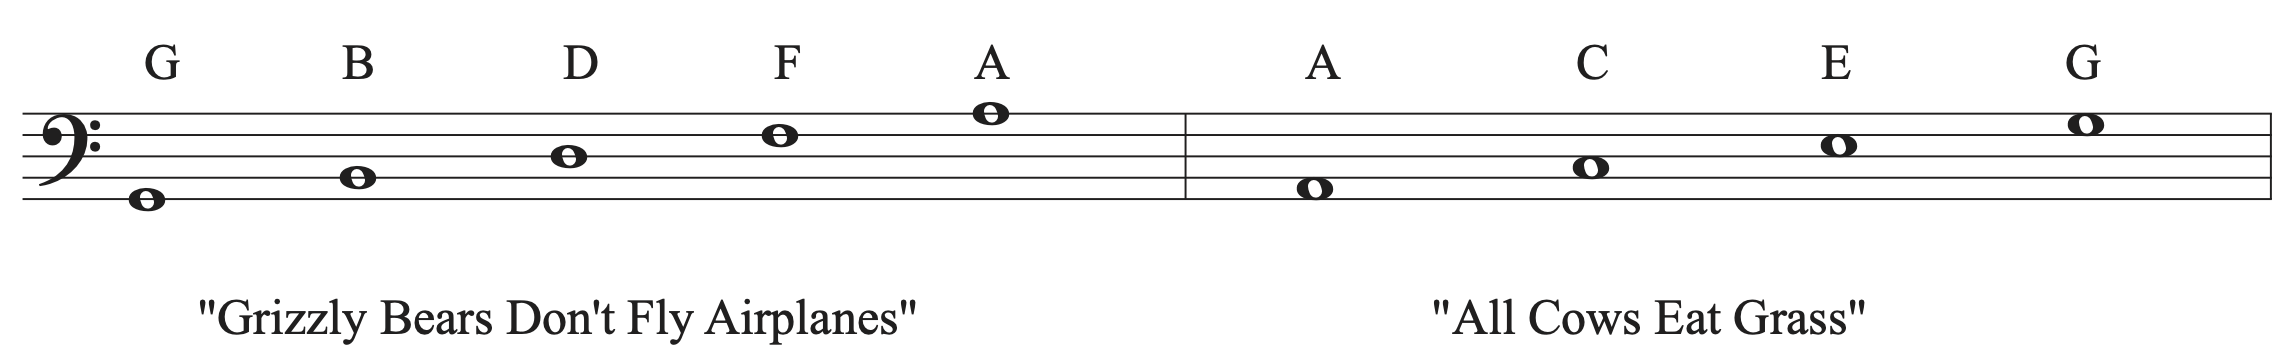 Bass clef notes on lines and spaces labeled on a staff.